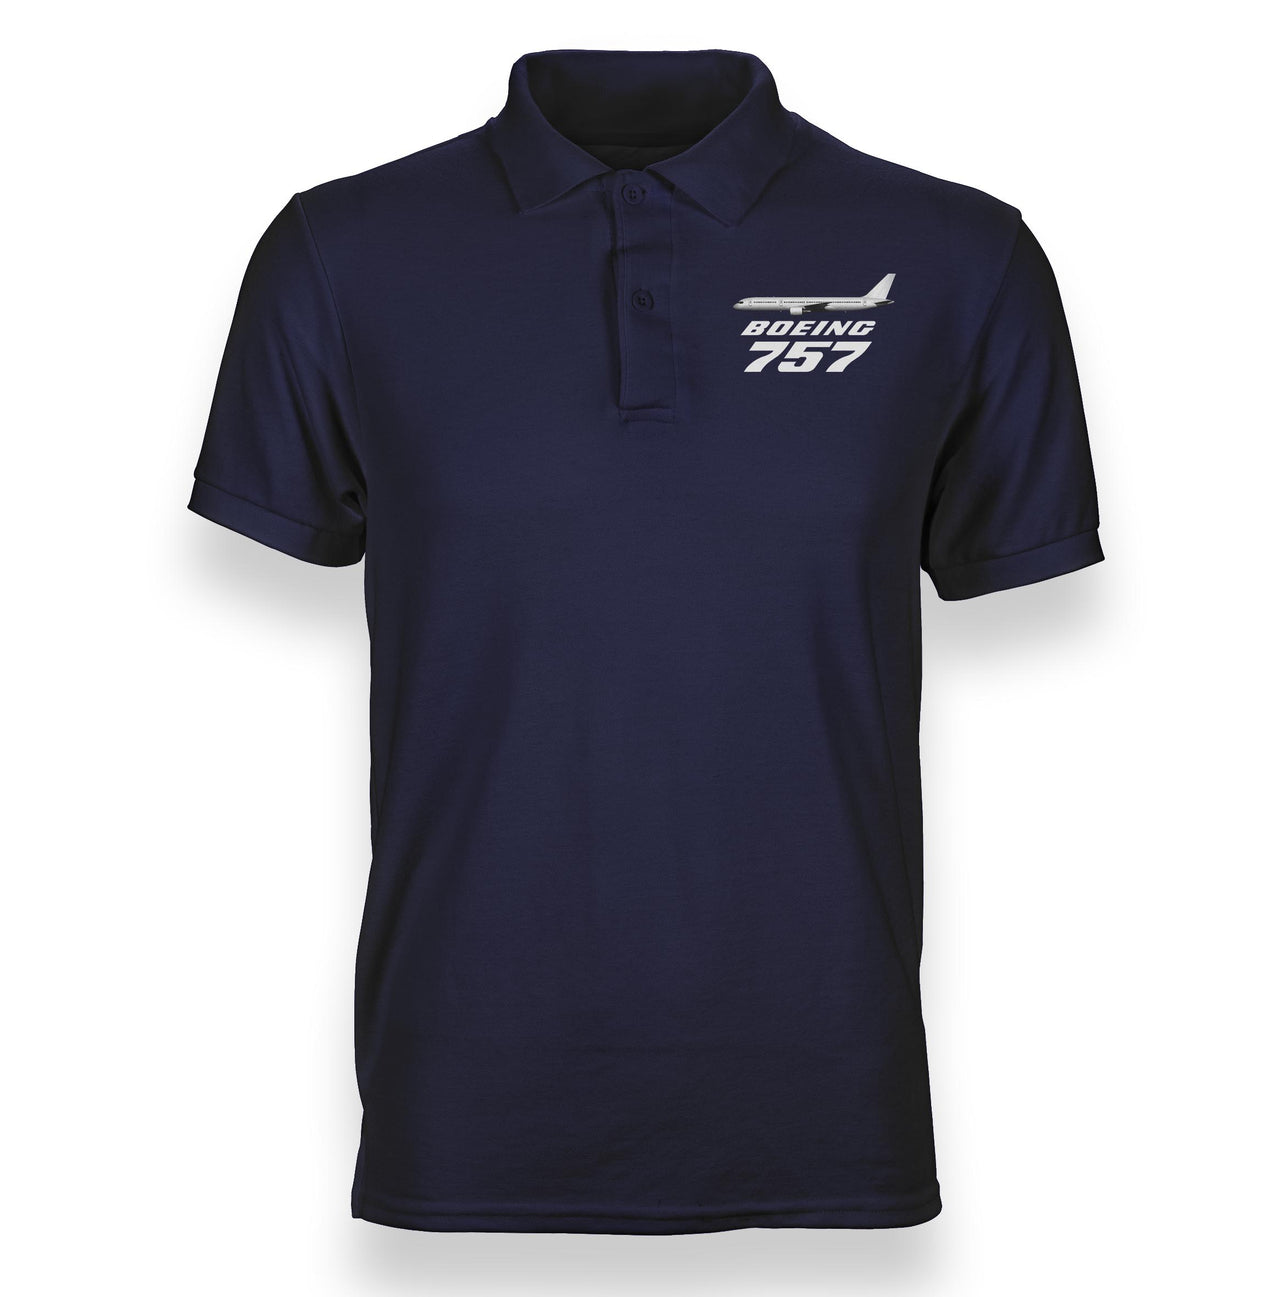 The Boeing 757 Designed Polo T-Shirts